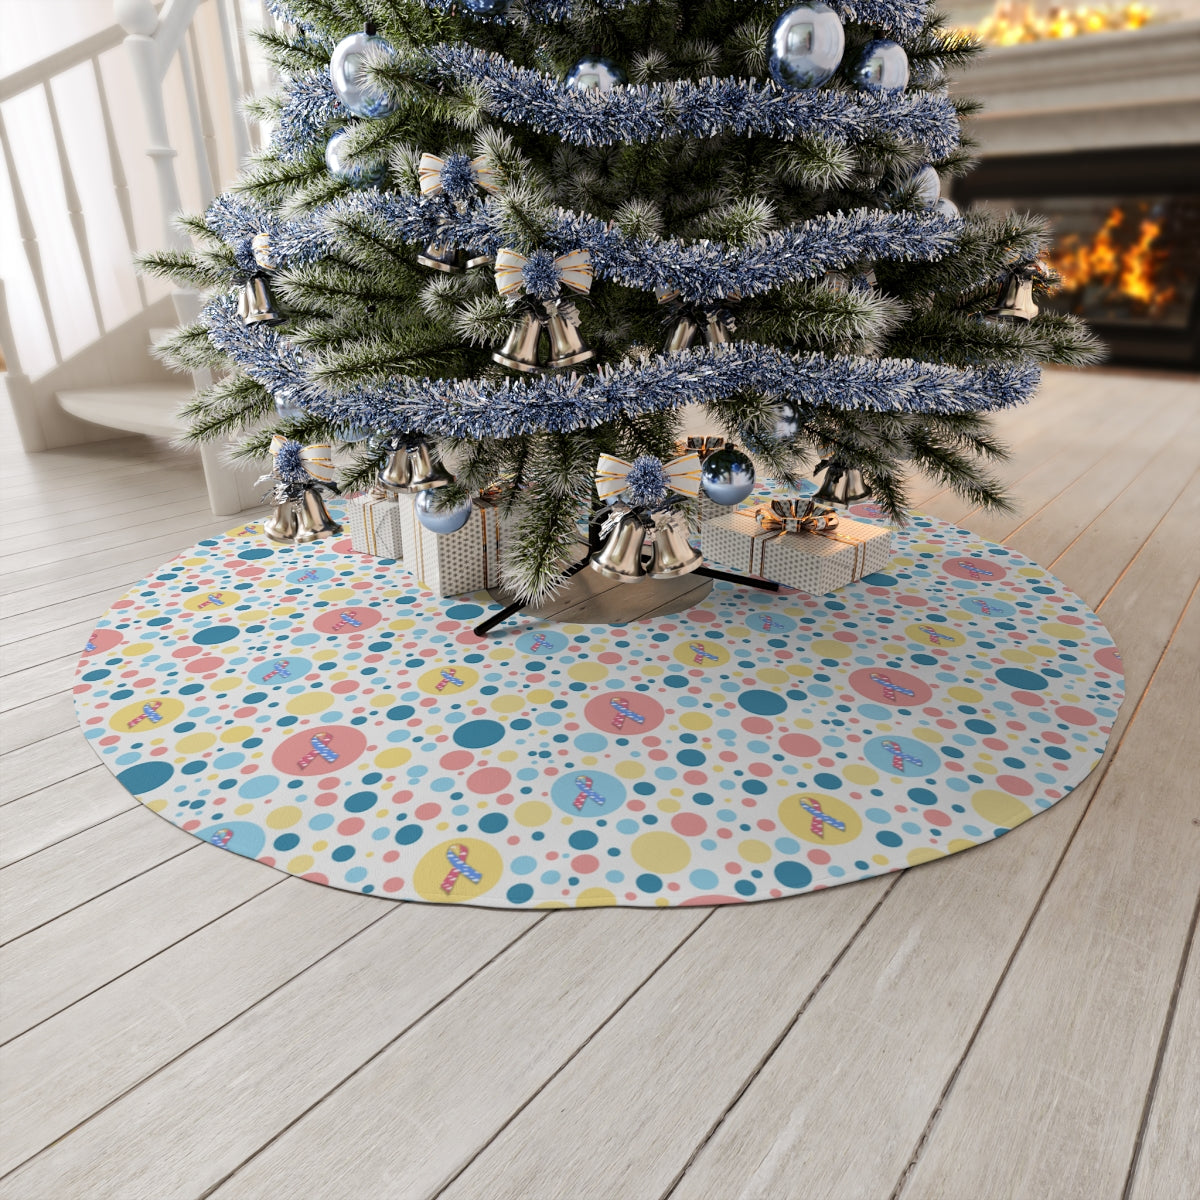 It's Not Just A Hole Congenital Diaphragmatic Hernia Awareness Round Tree Skirt